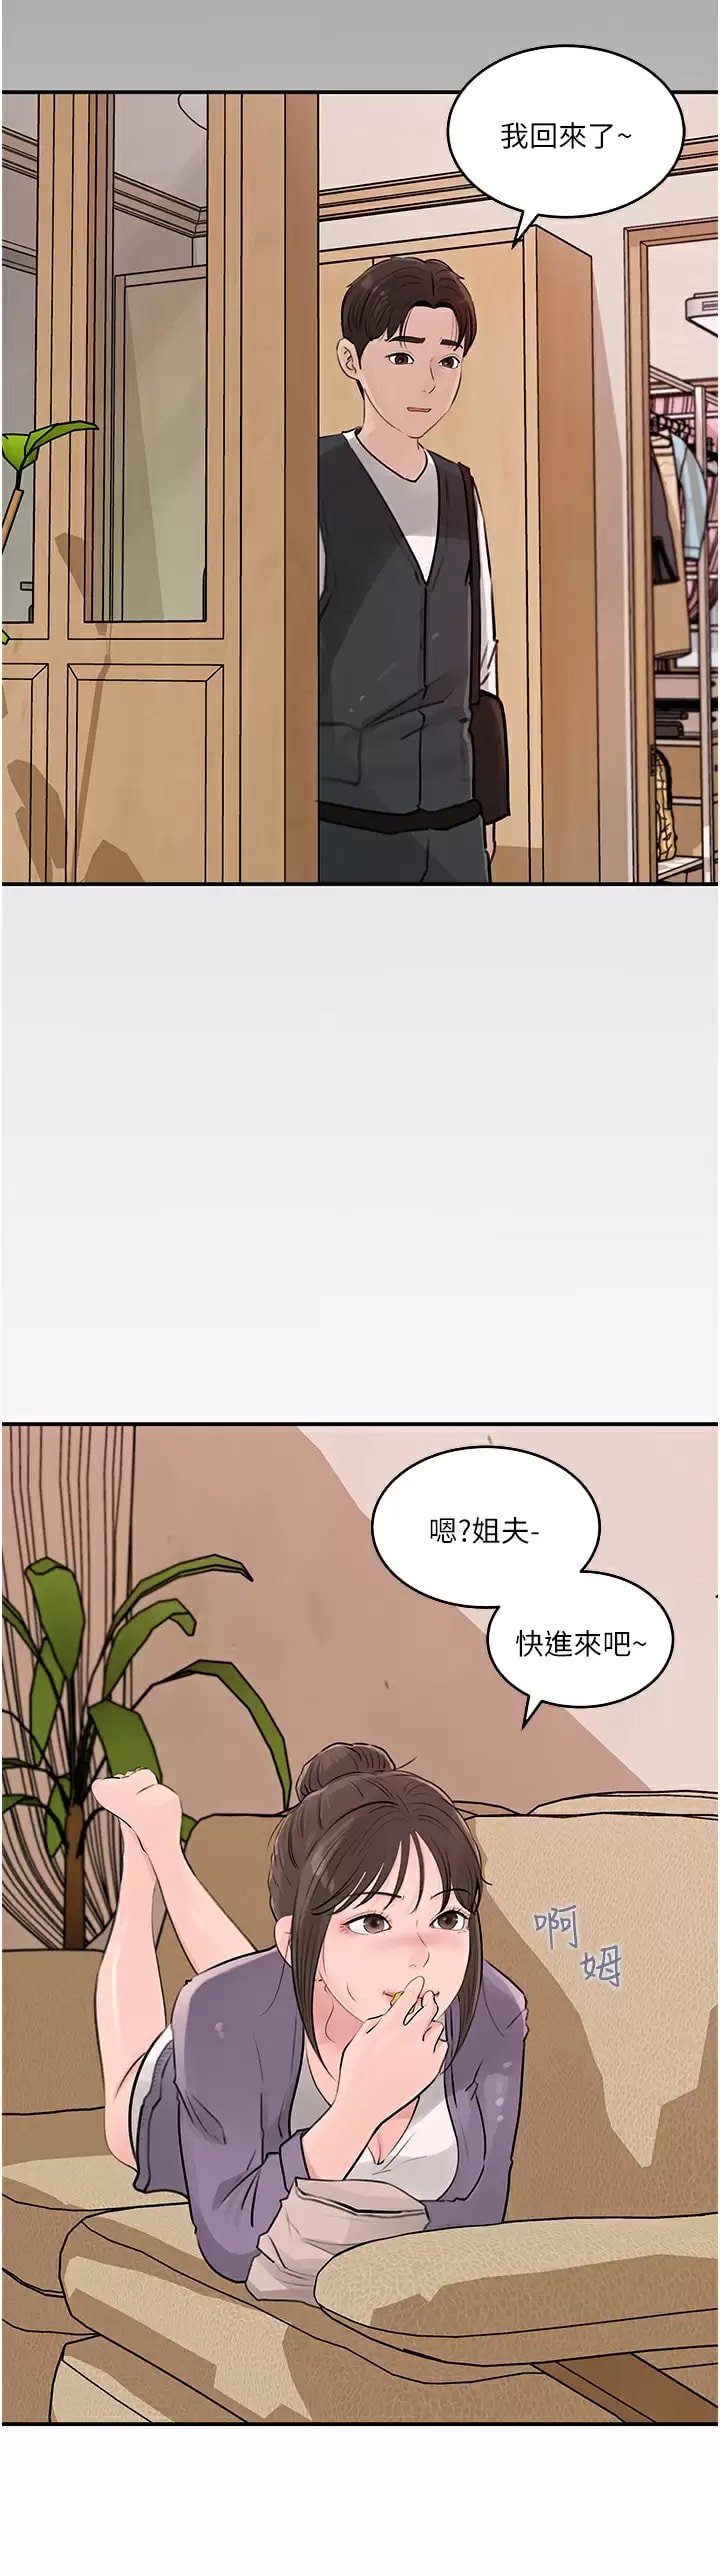 in-my-sister-in-law-raw-chap-34-31